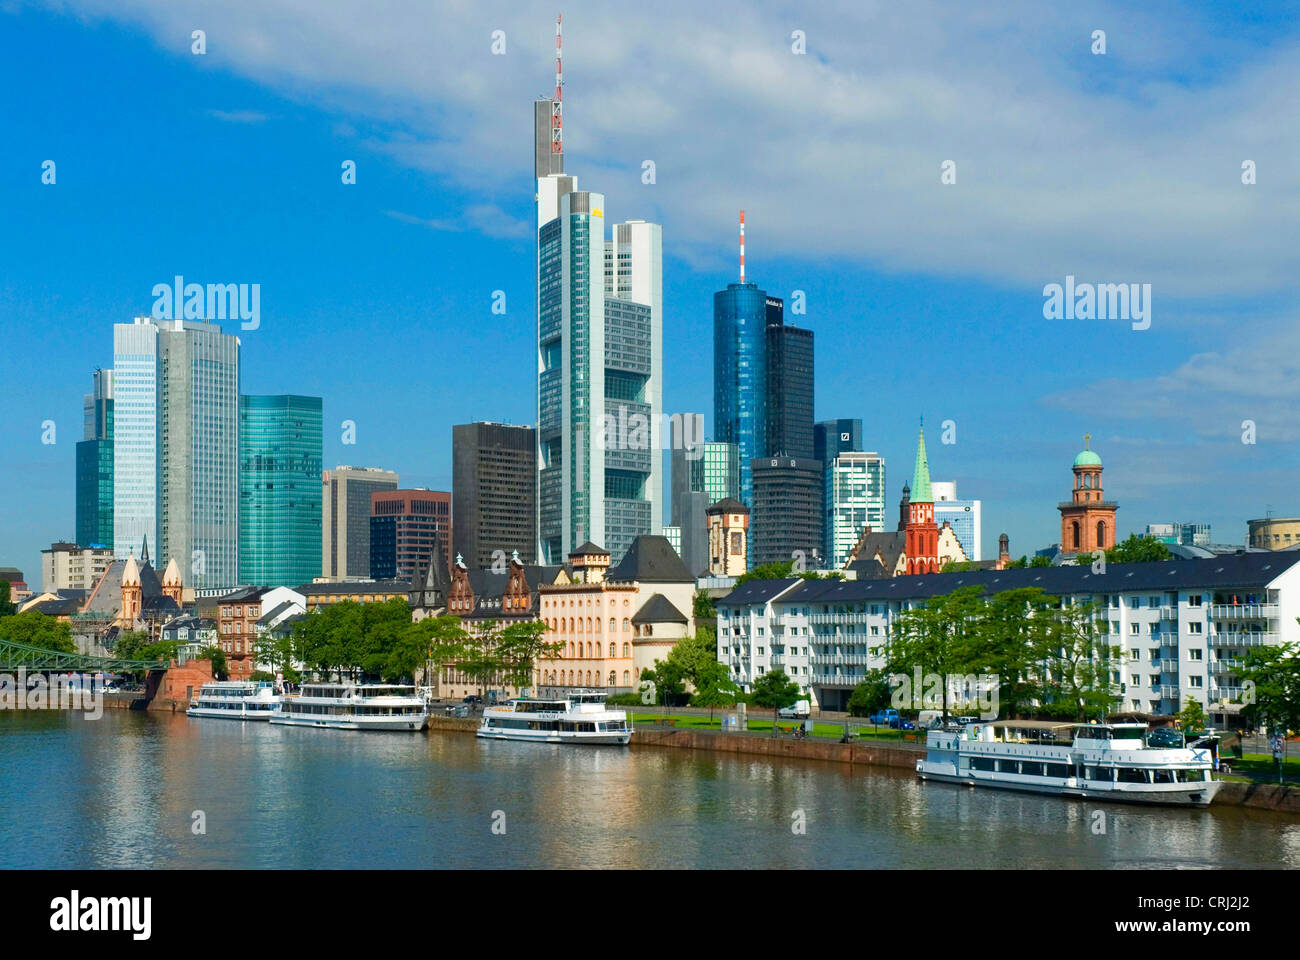 houses at Main shore, financial district in background, Germany, Frankfurt am Main Stock Photo